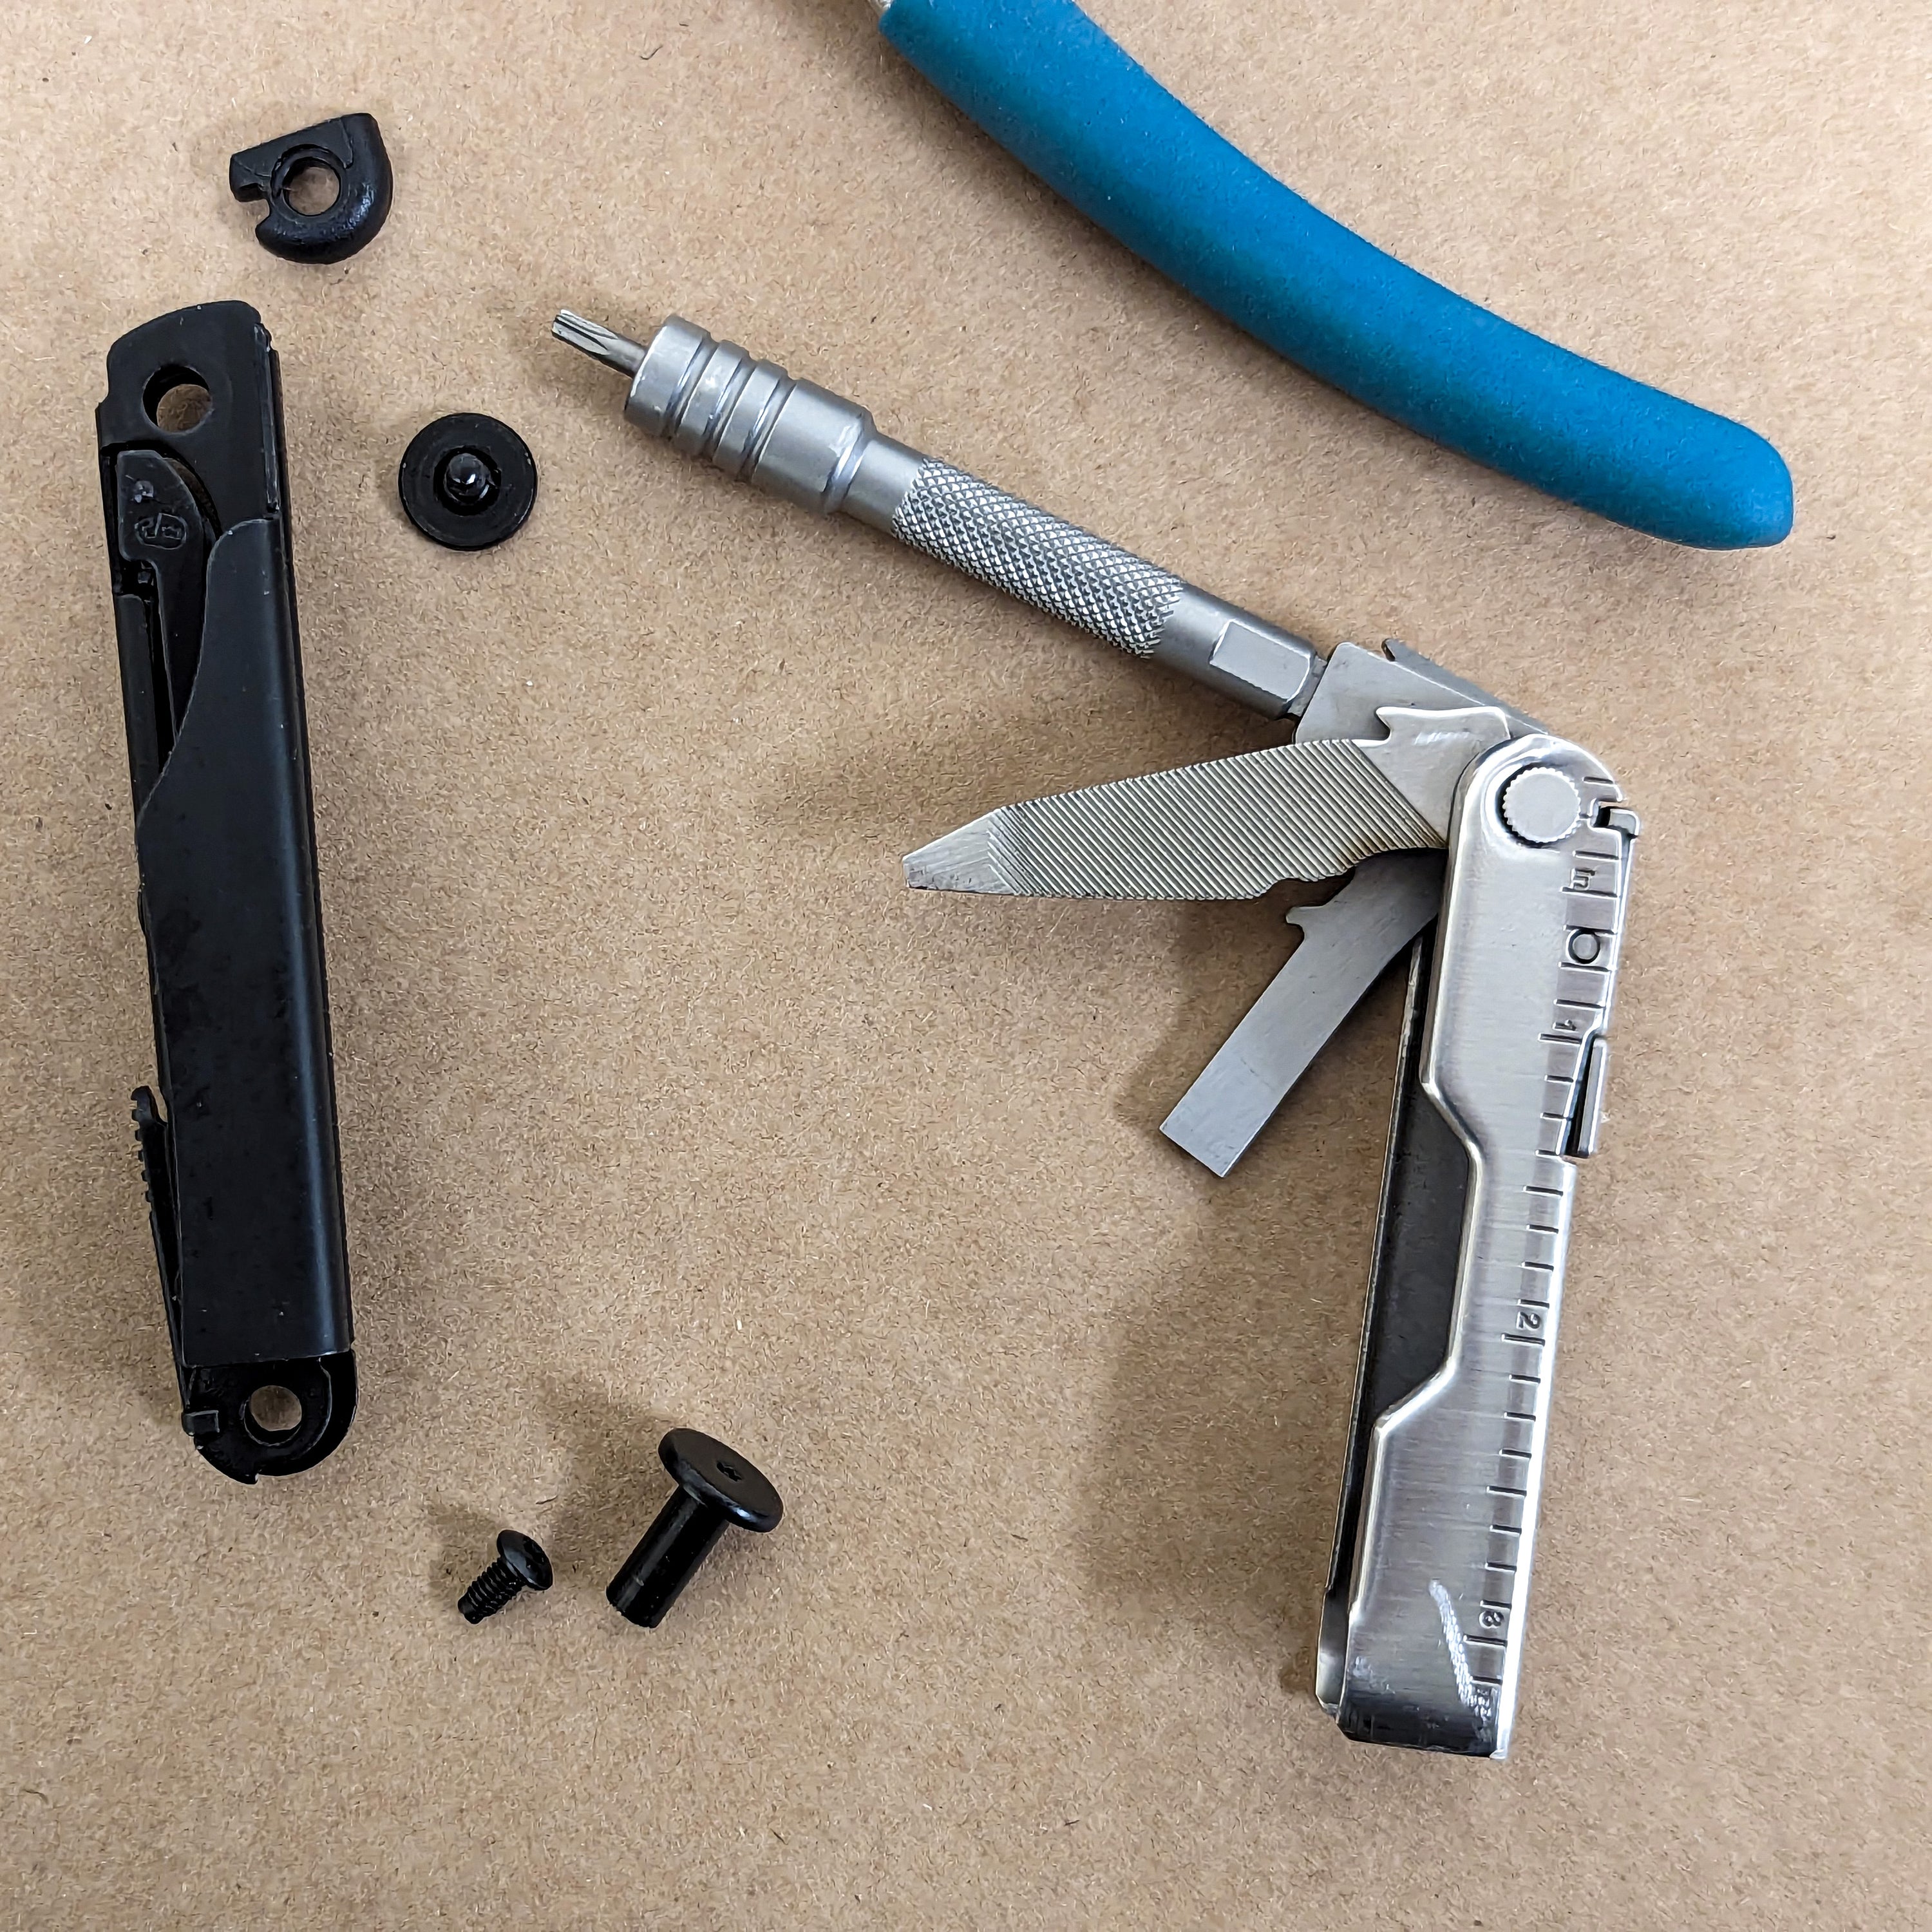 Parts from Original Leatherman Wave: 1 Part for repairs or mods